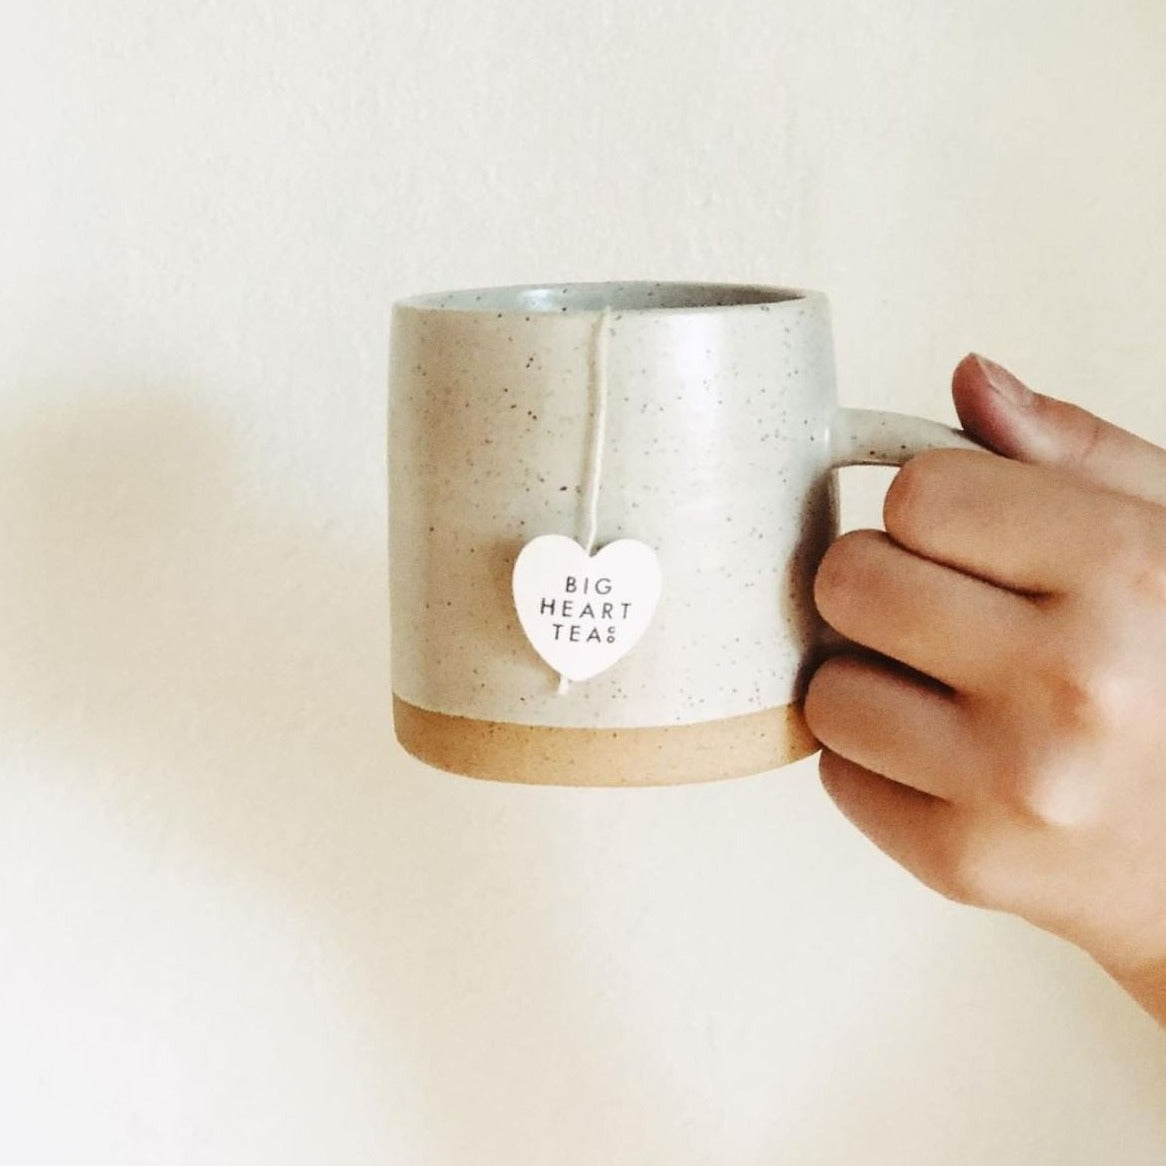 "Hand holding a white ceramic mug with a tea bag of Blushing Tea, a naturally caffeine-free blend featuring hibiscus, lemongrass, and tulsi. Ideal for a vitamin C boost and creating a vibrant pink brew that's tart, sweet, and citrusy. Perfect for kids and adults alike.